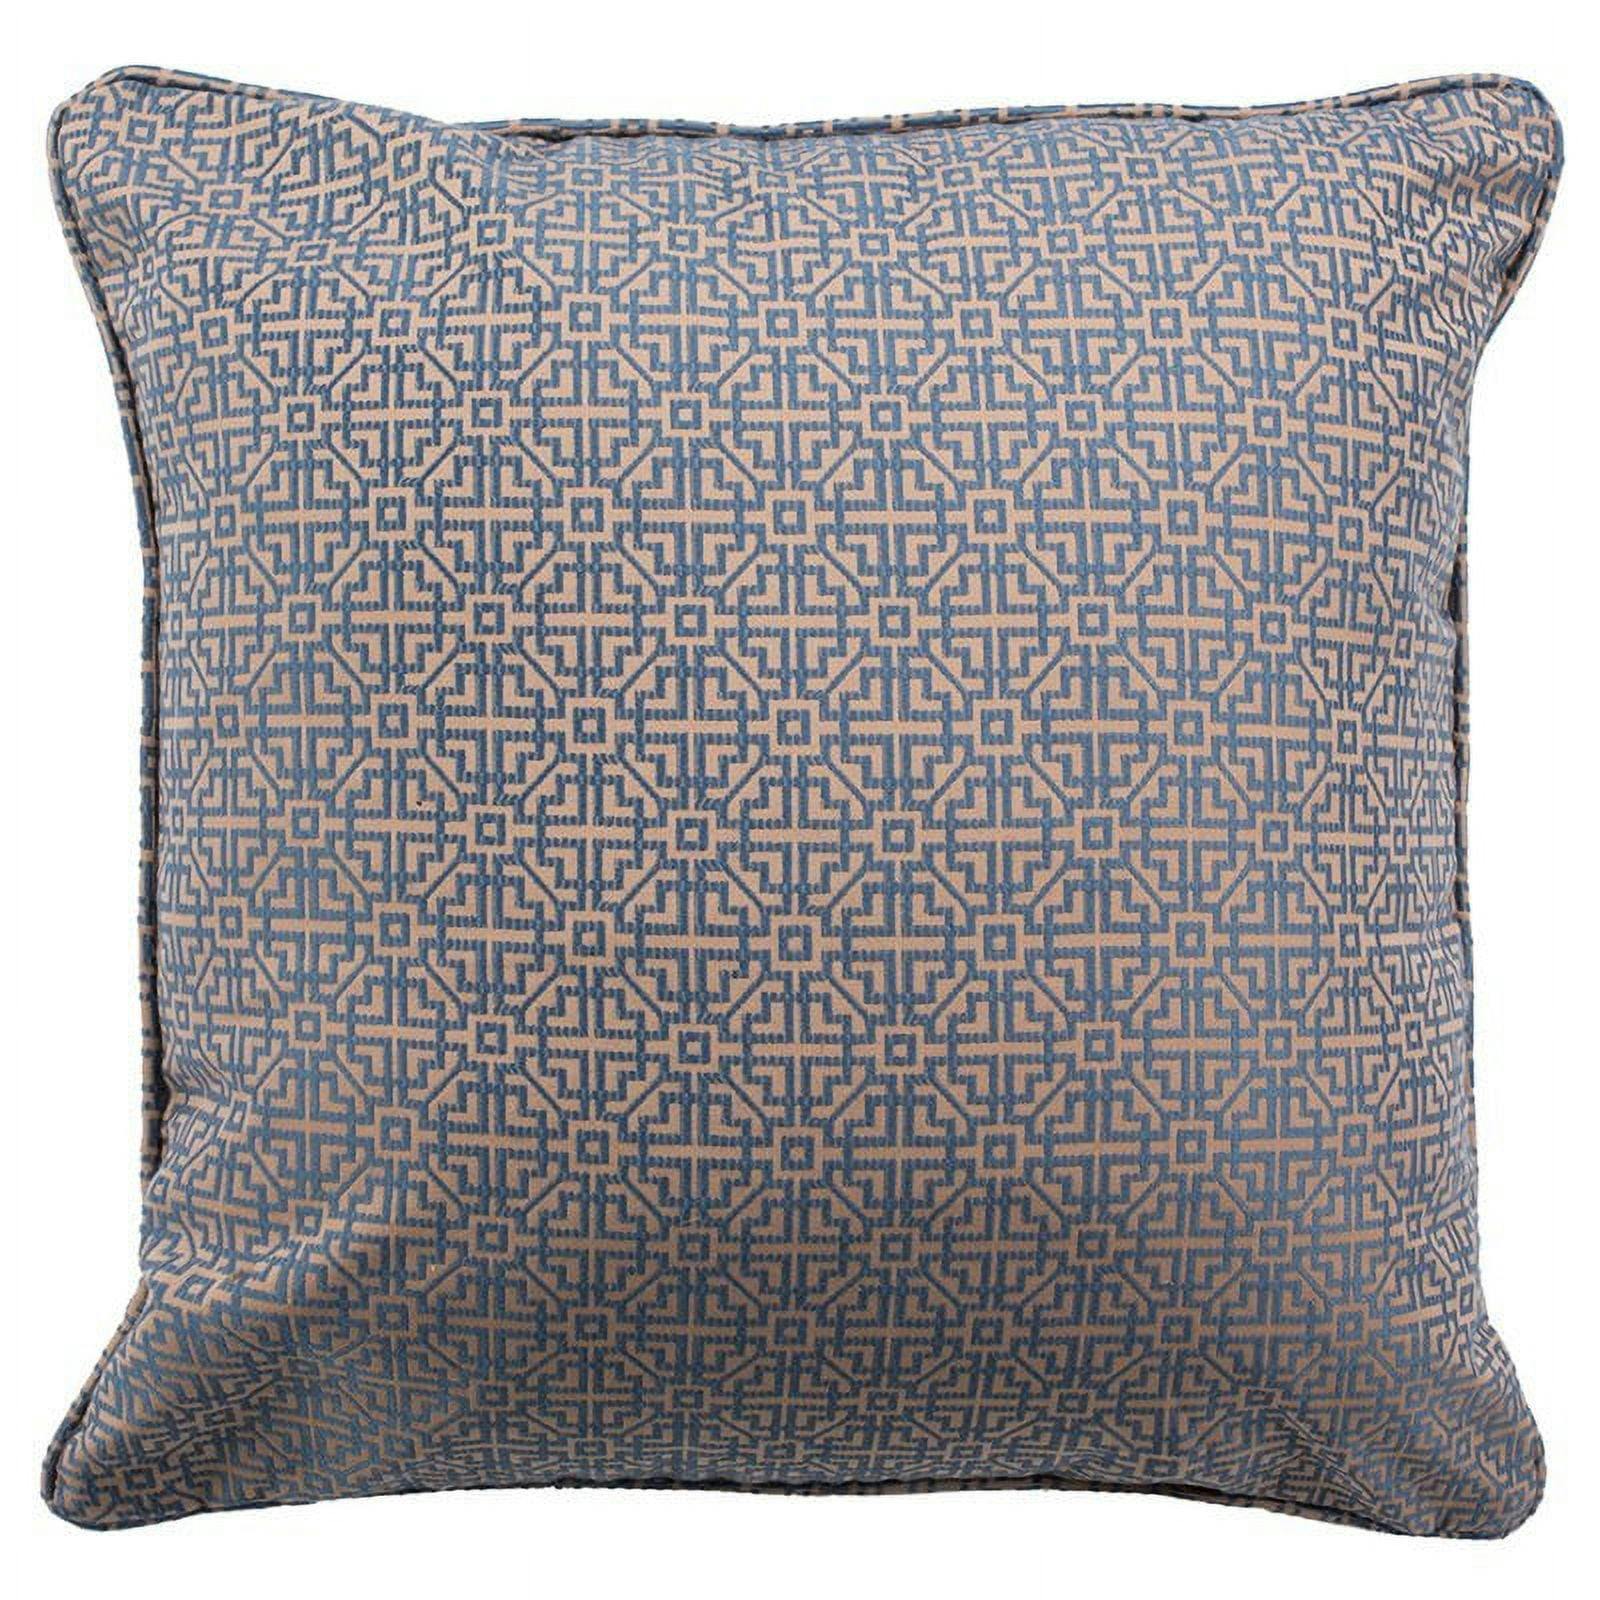 Contemporary Blue and Beige 20" Square Geometric Plush Pillow